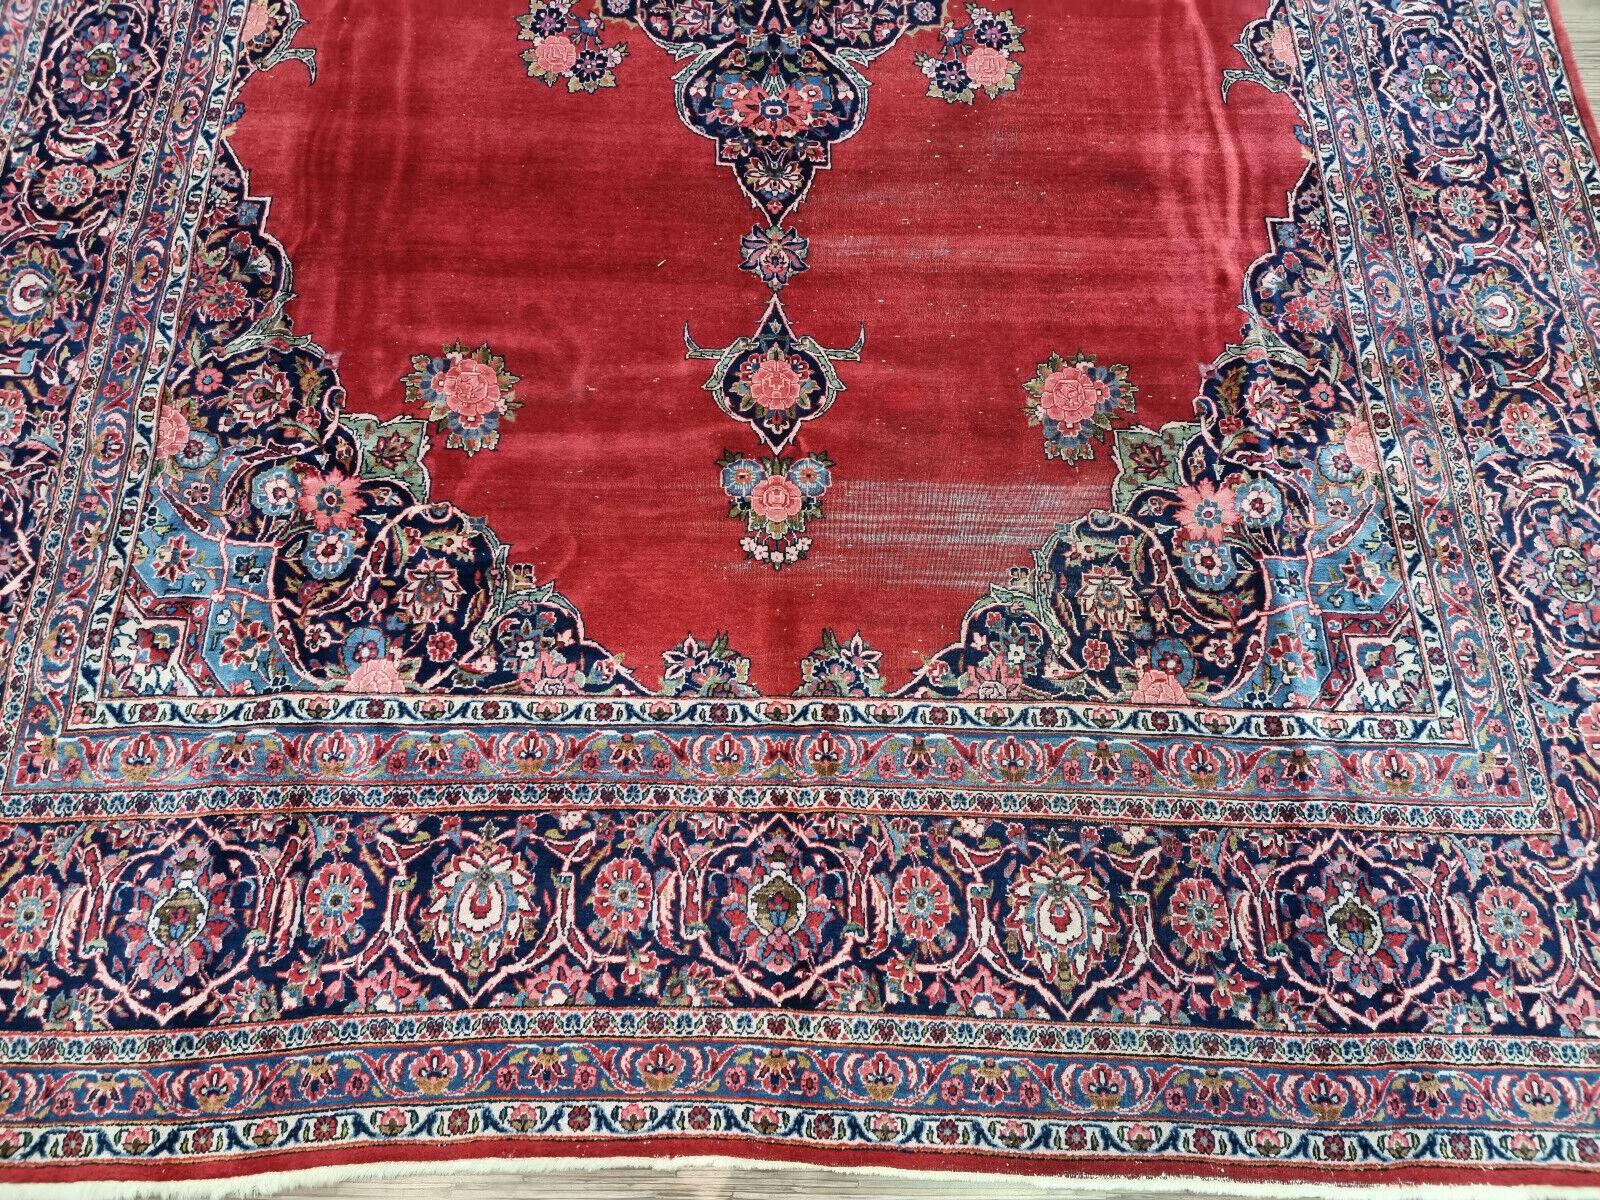 Handmade Antique Persian Style Kashan Distressed Rug 8.5' x 12.9', 1920s - 1D68 For Sale 3